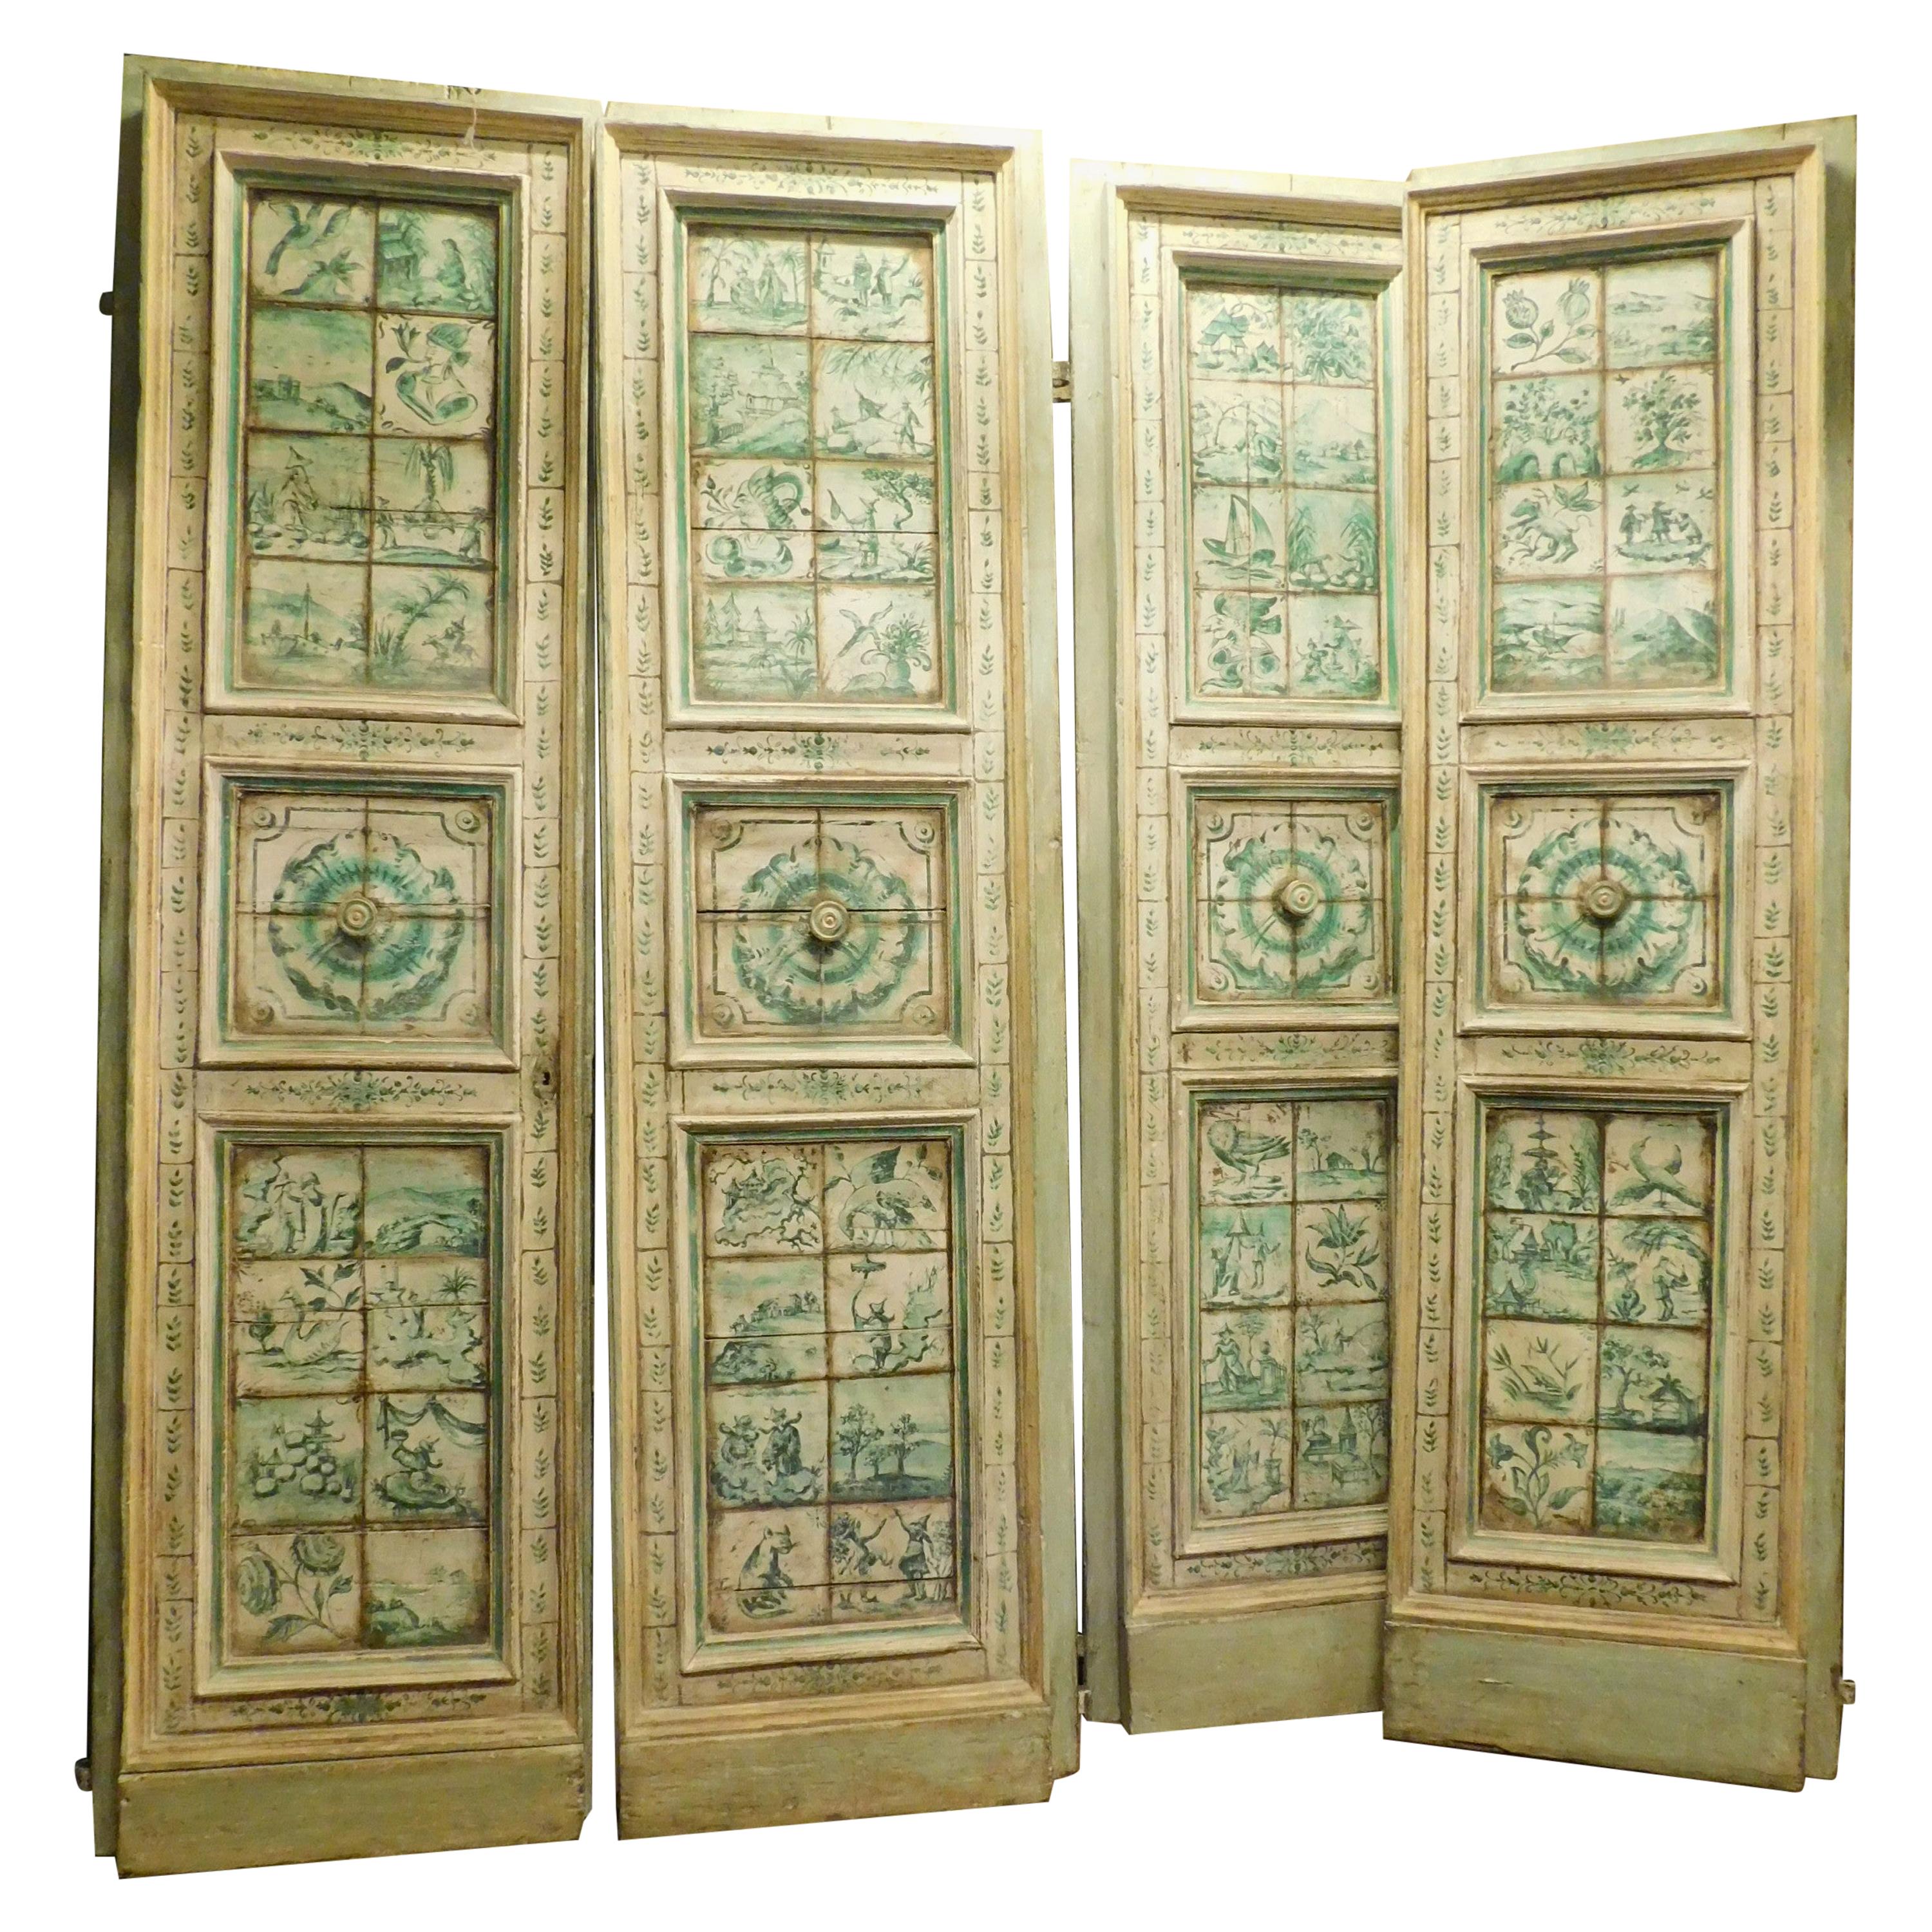 5 Pairs of Antiques Doors with Majolica Hand Paintings, Tuscany, Italy, 1700